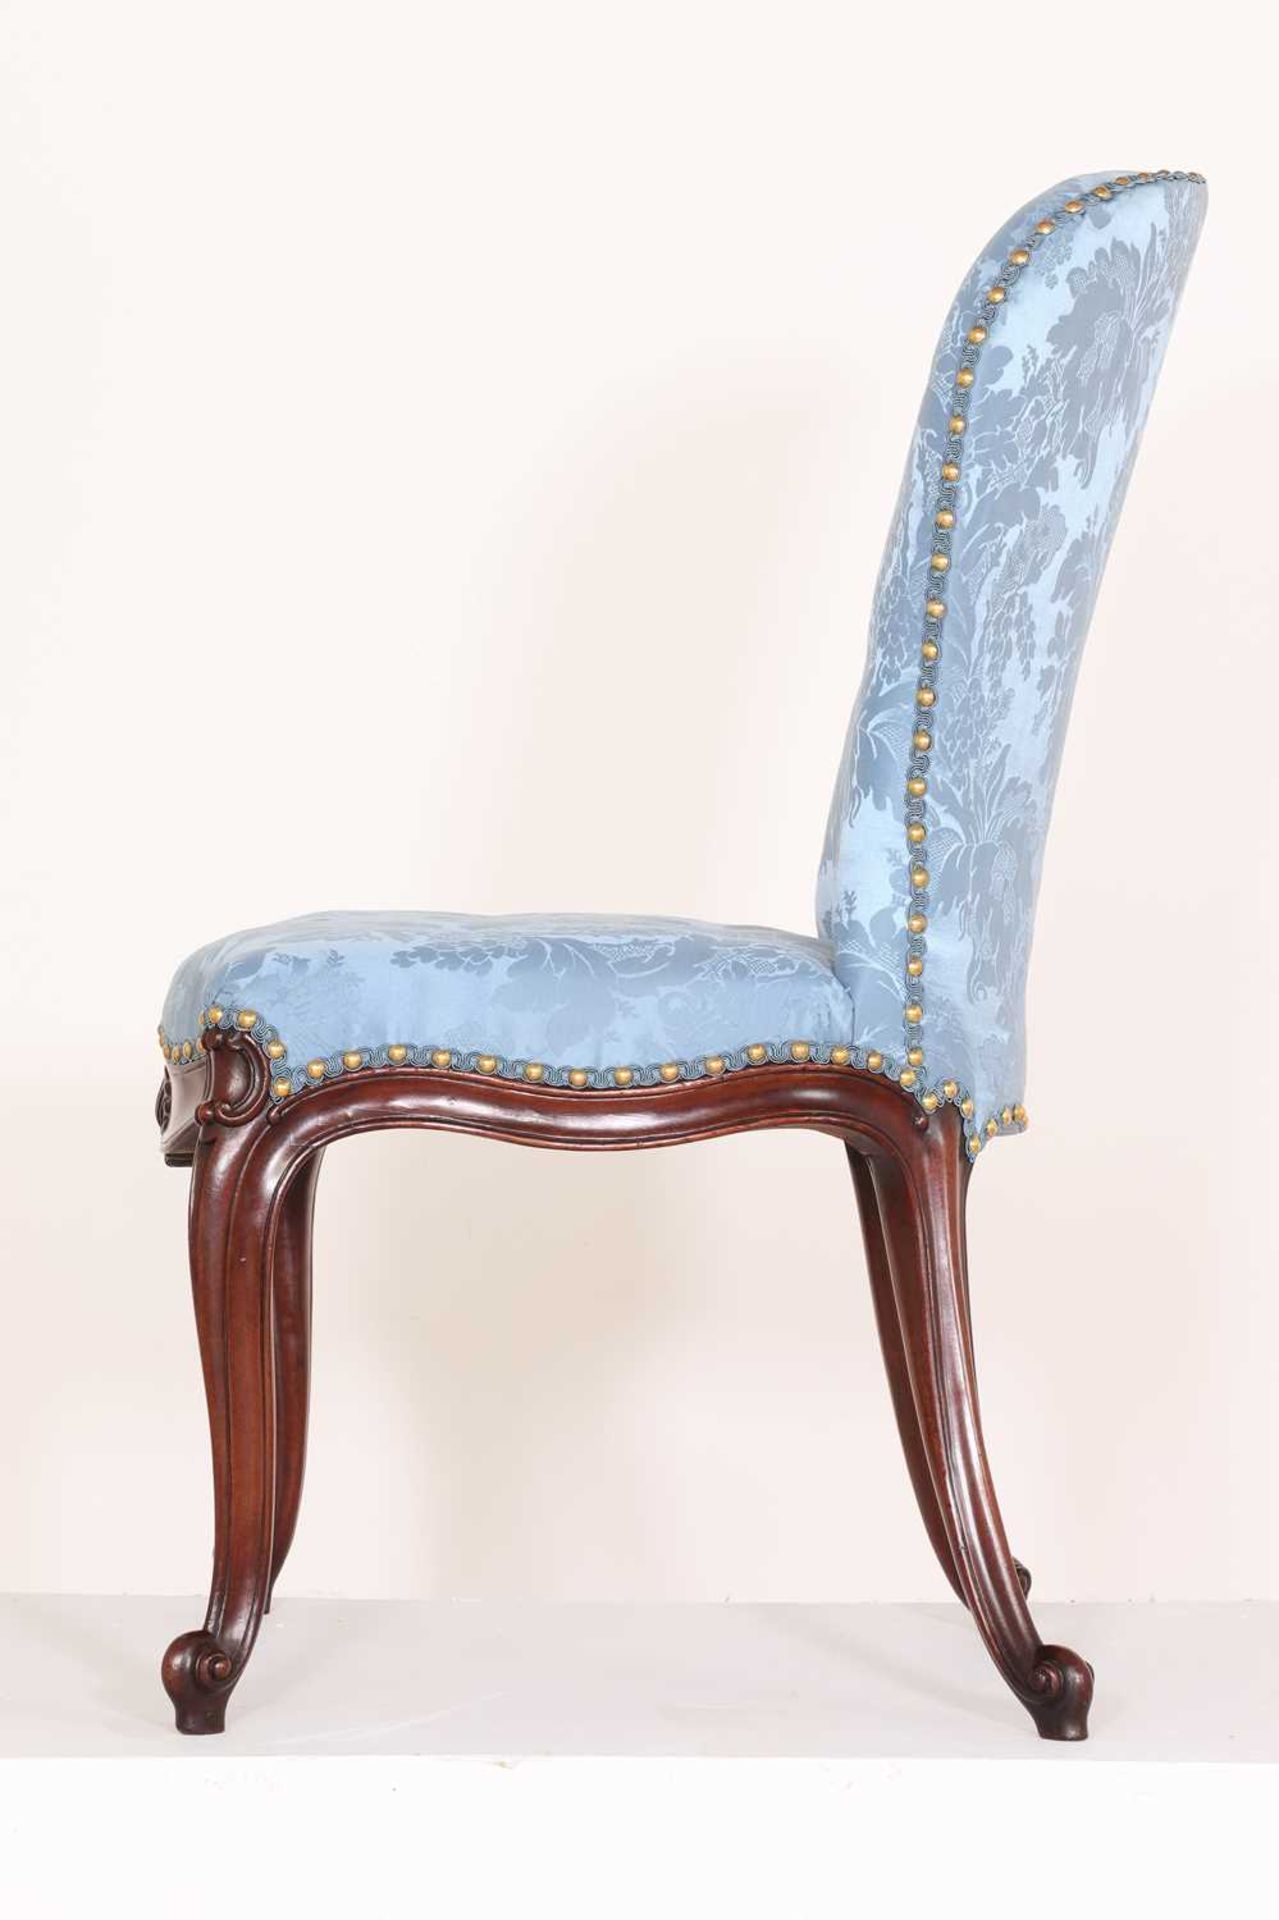 A George III mahogany side chair attributed to Thomas Chippendale - Image 4 of 53